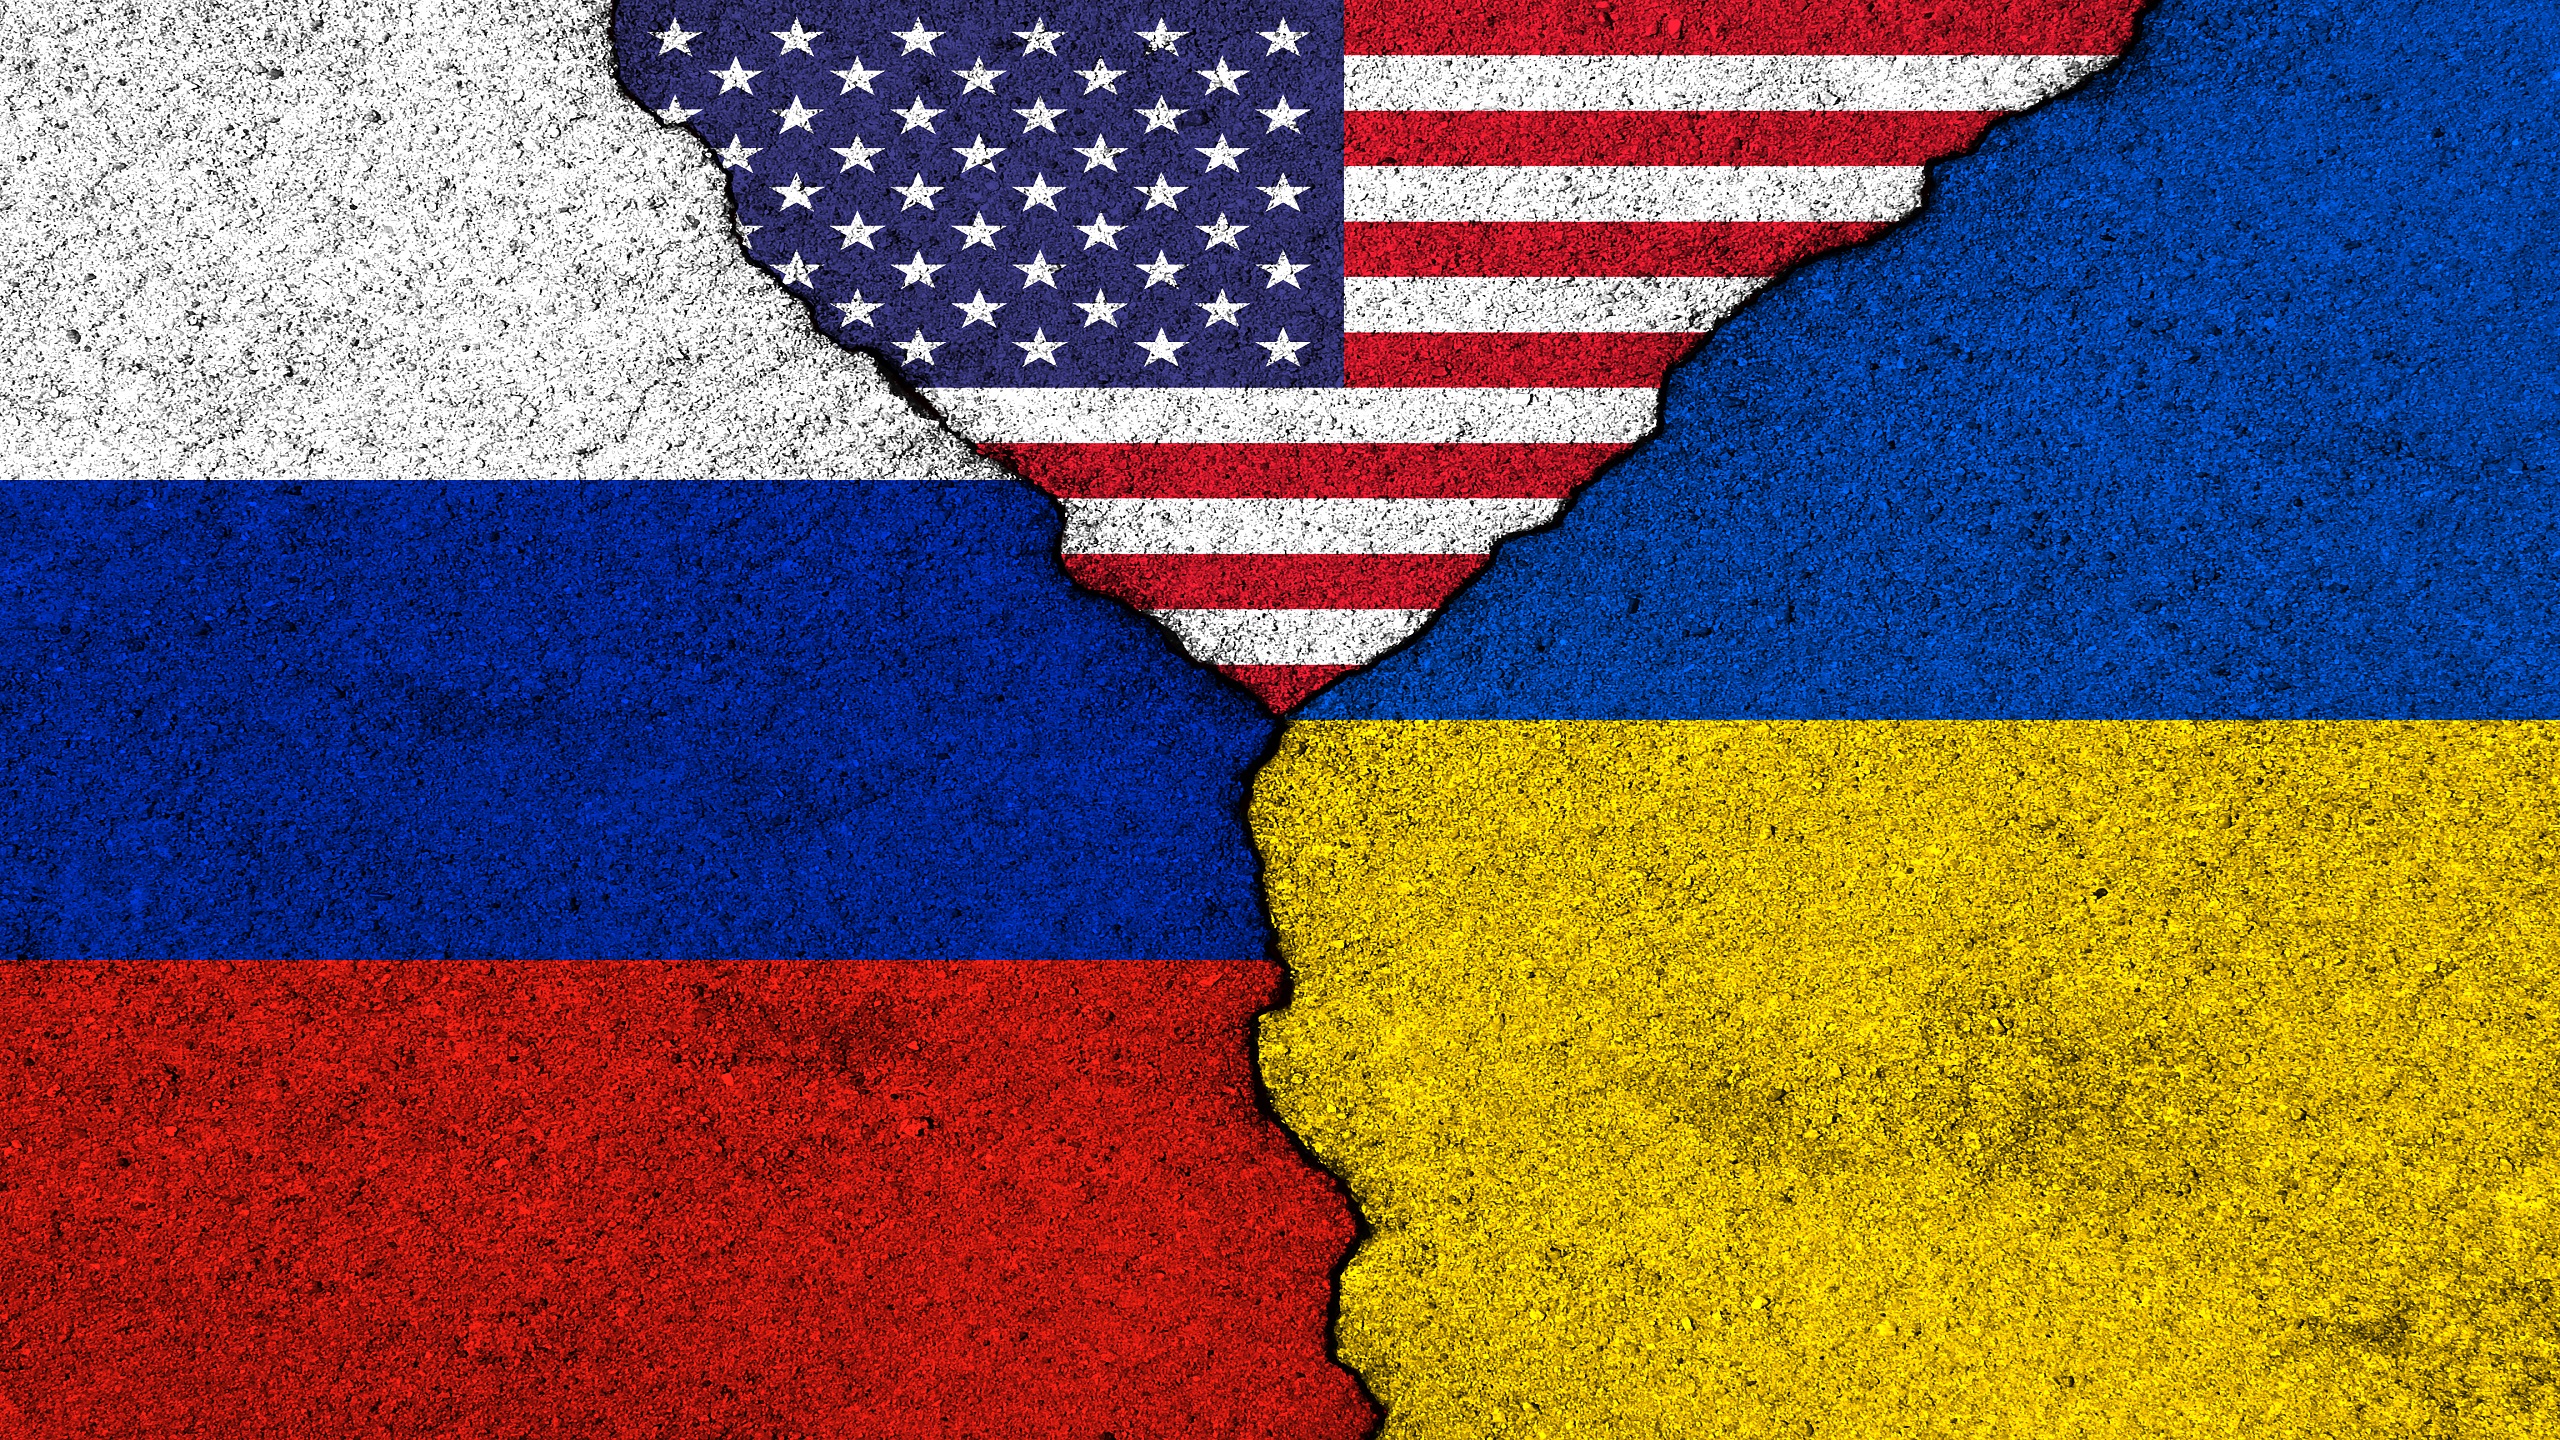 Ukraine’s Neutrality and Russian-American Relations